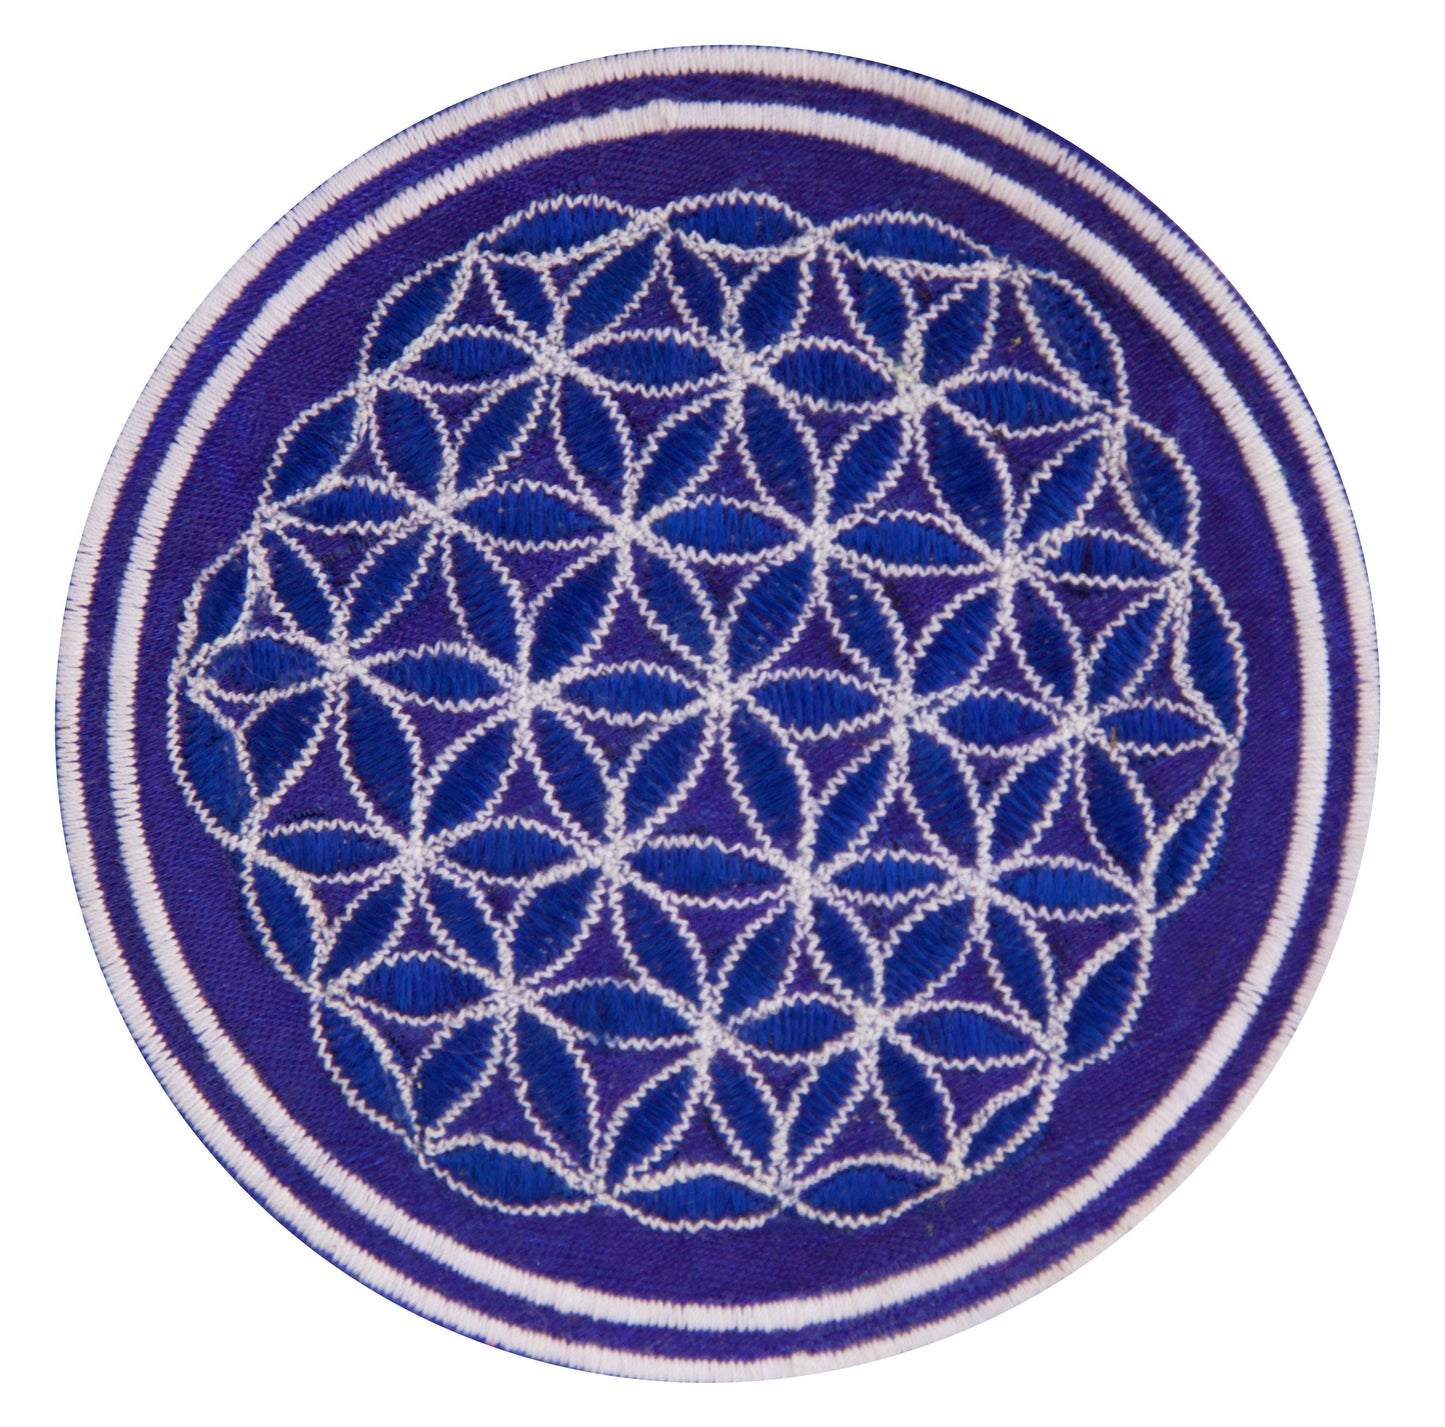 white black flower of life patch small size with variations